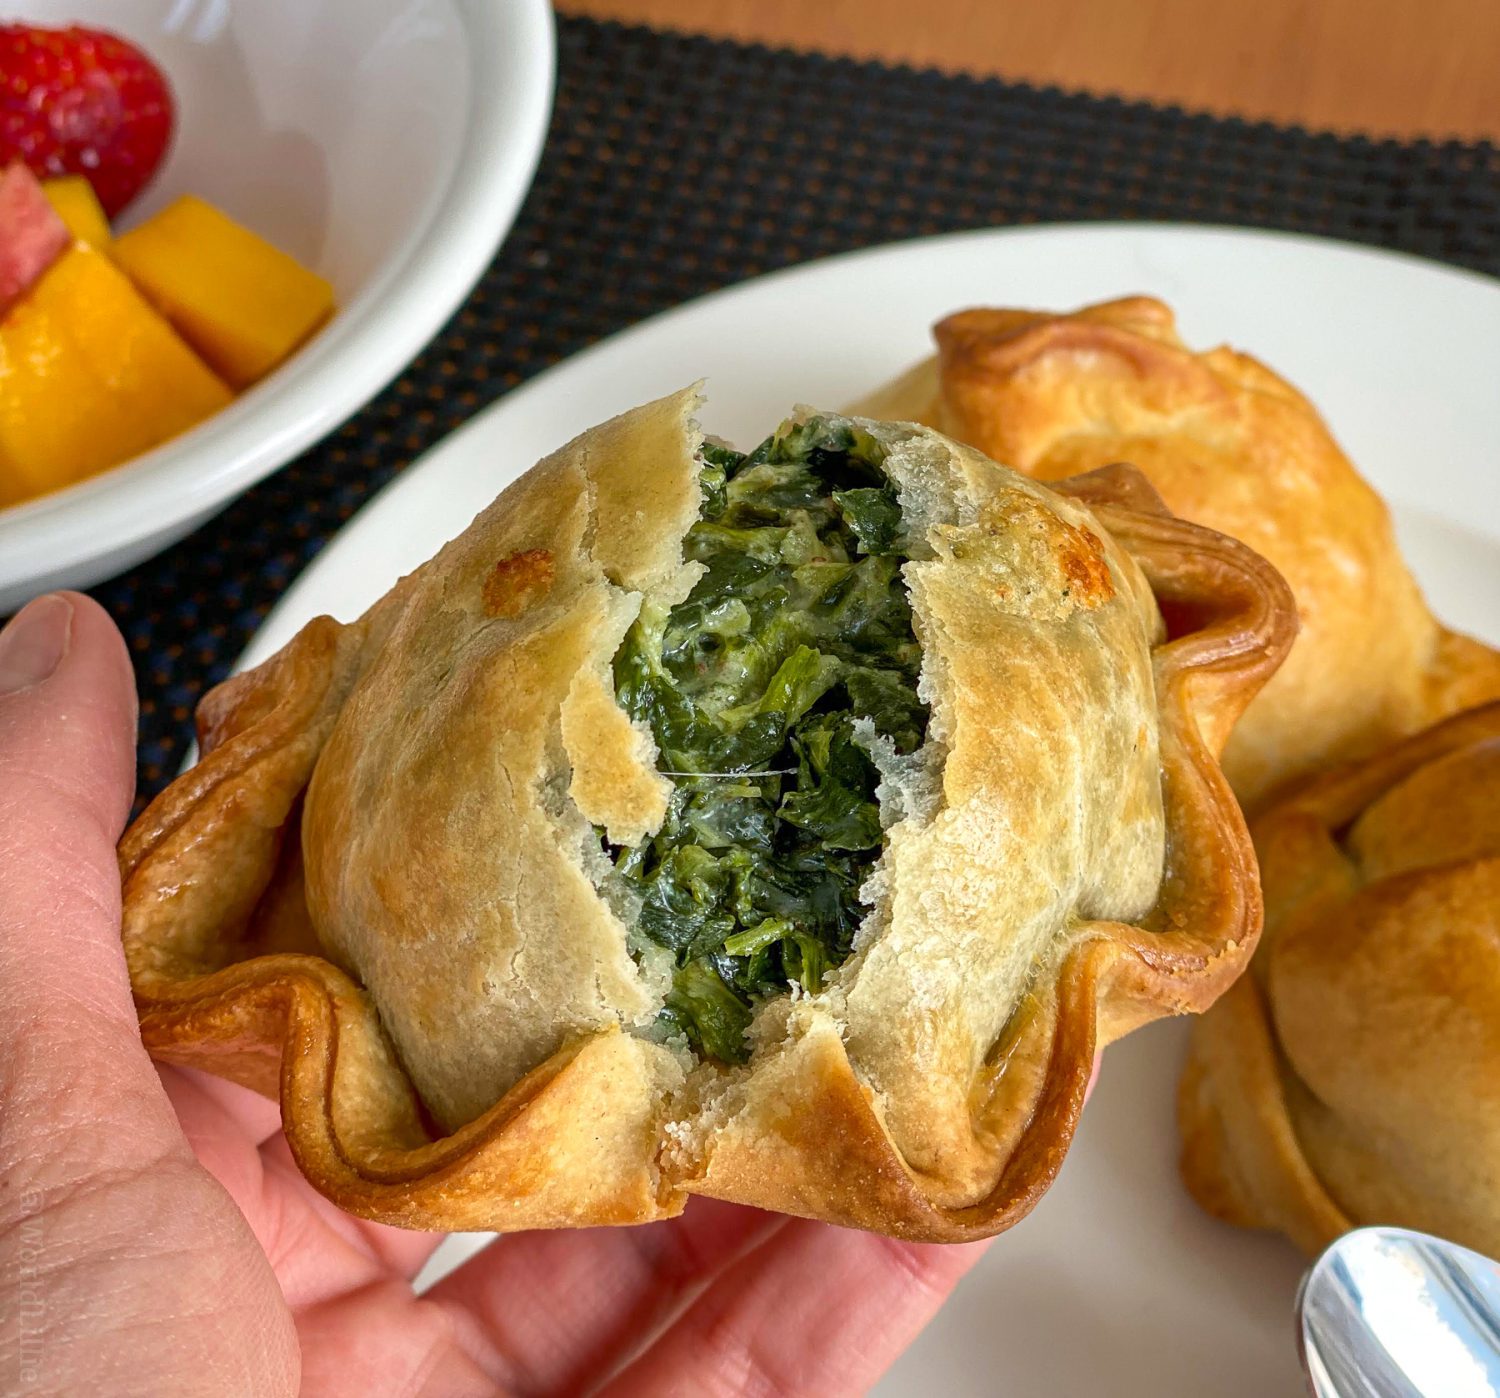 Spinach and cheese empanada.